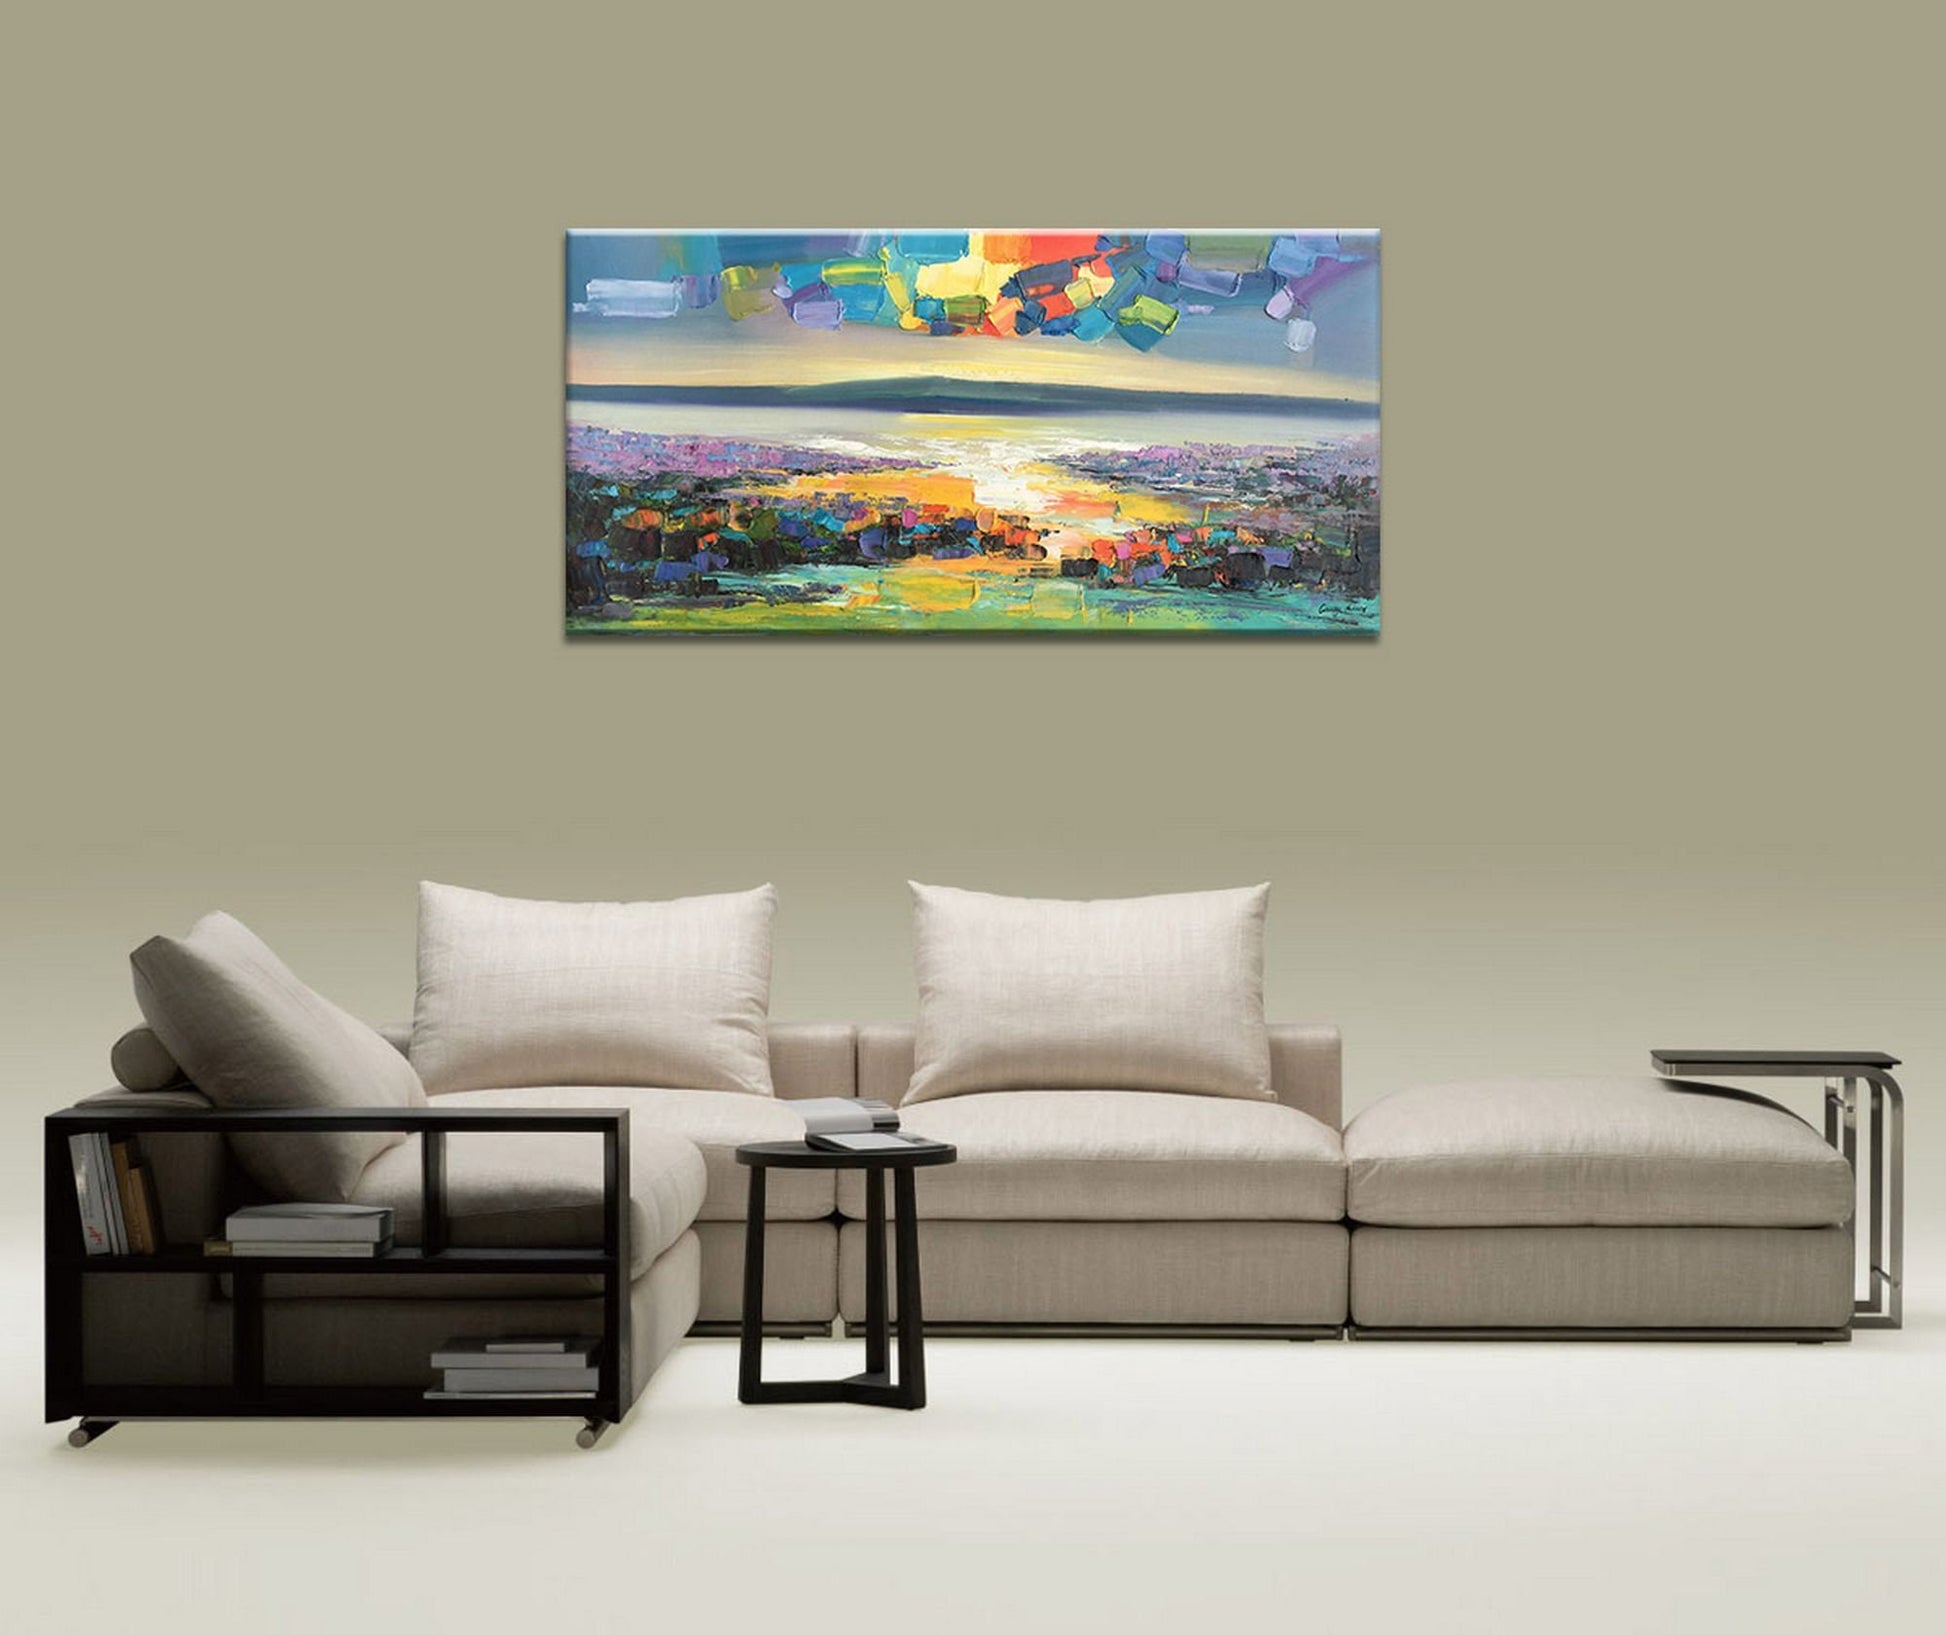 Large Landscape Oil Painting Abstract Landscape Art, Original Artwork, Canvas Painting, Canvas Wall Decor, Large Painting, Kitchen Wall Art